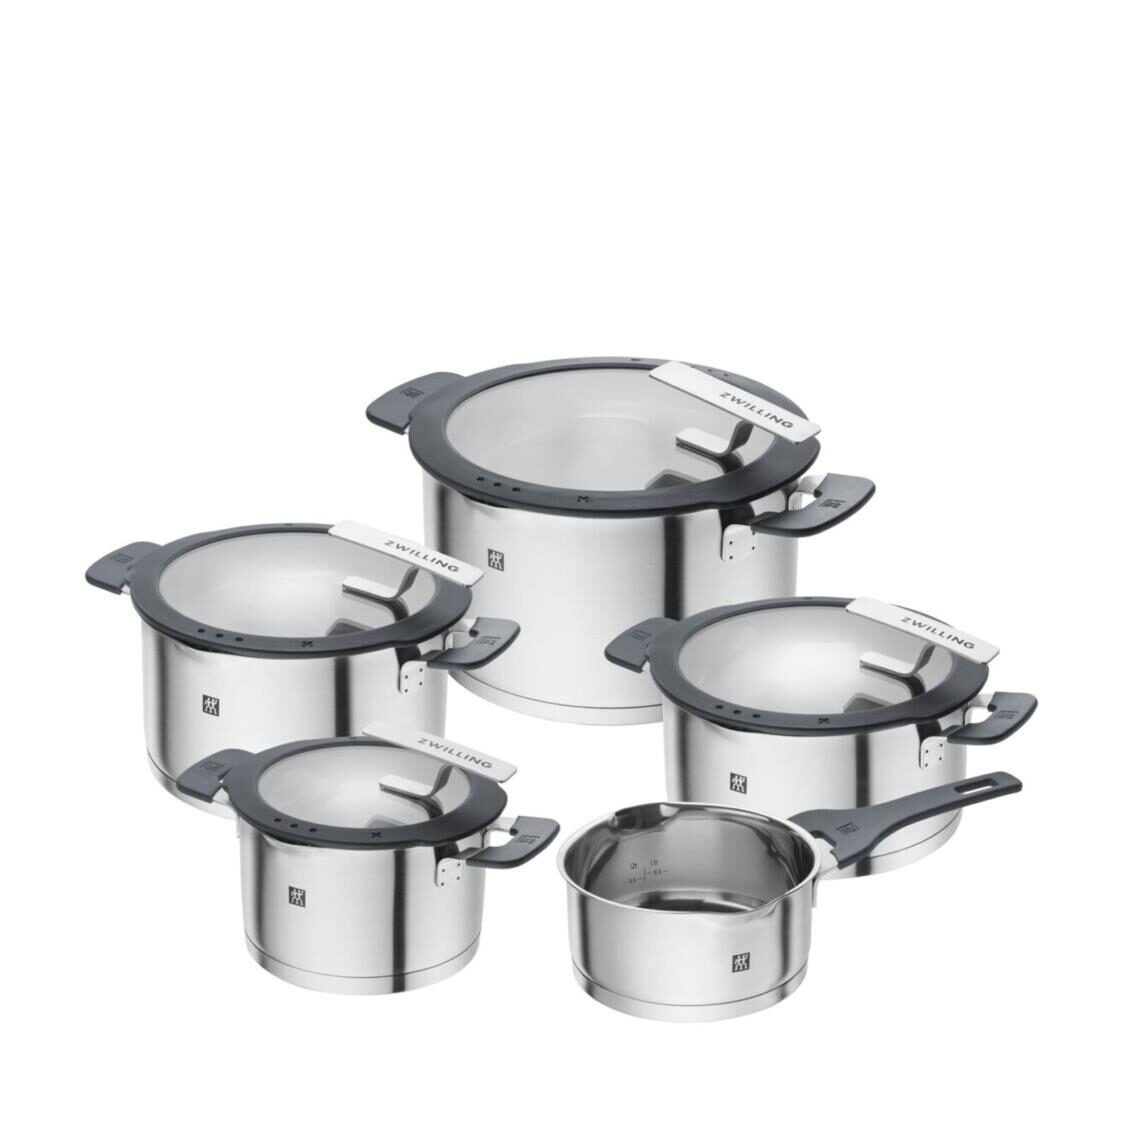 ZWILLING Simplify 5pc Cookware Set - 66870-005